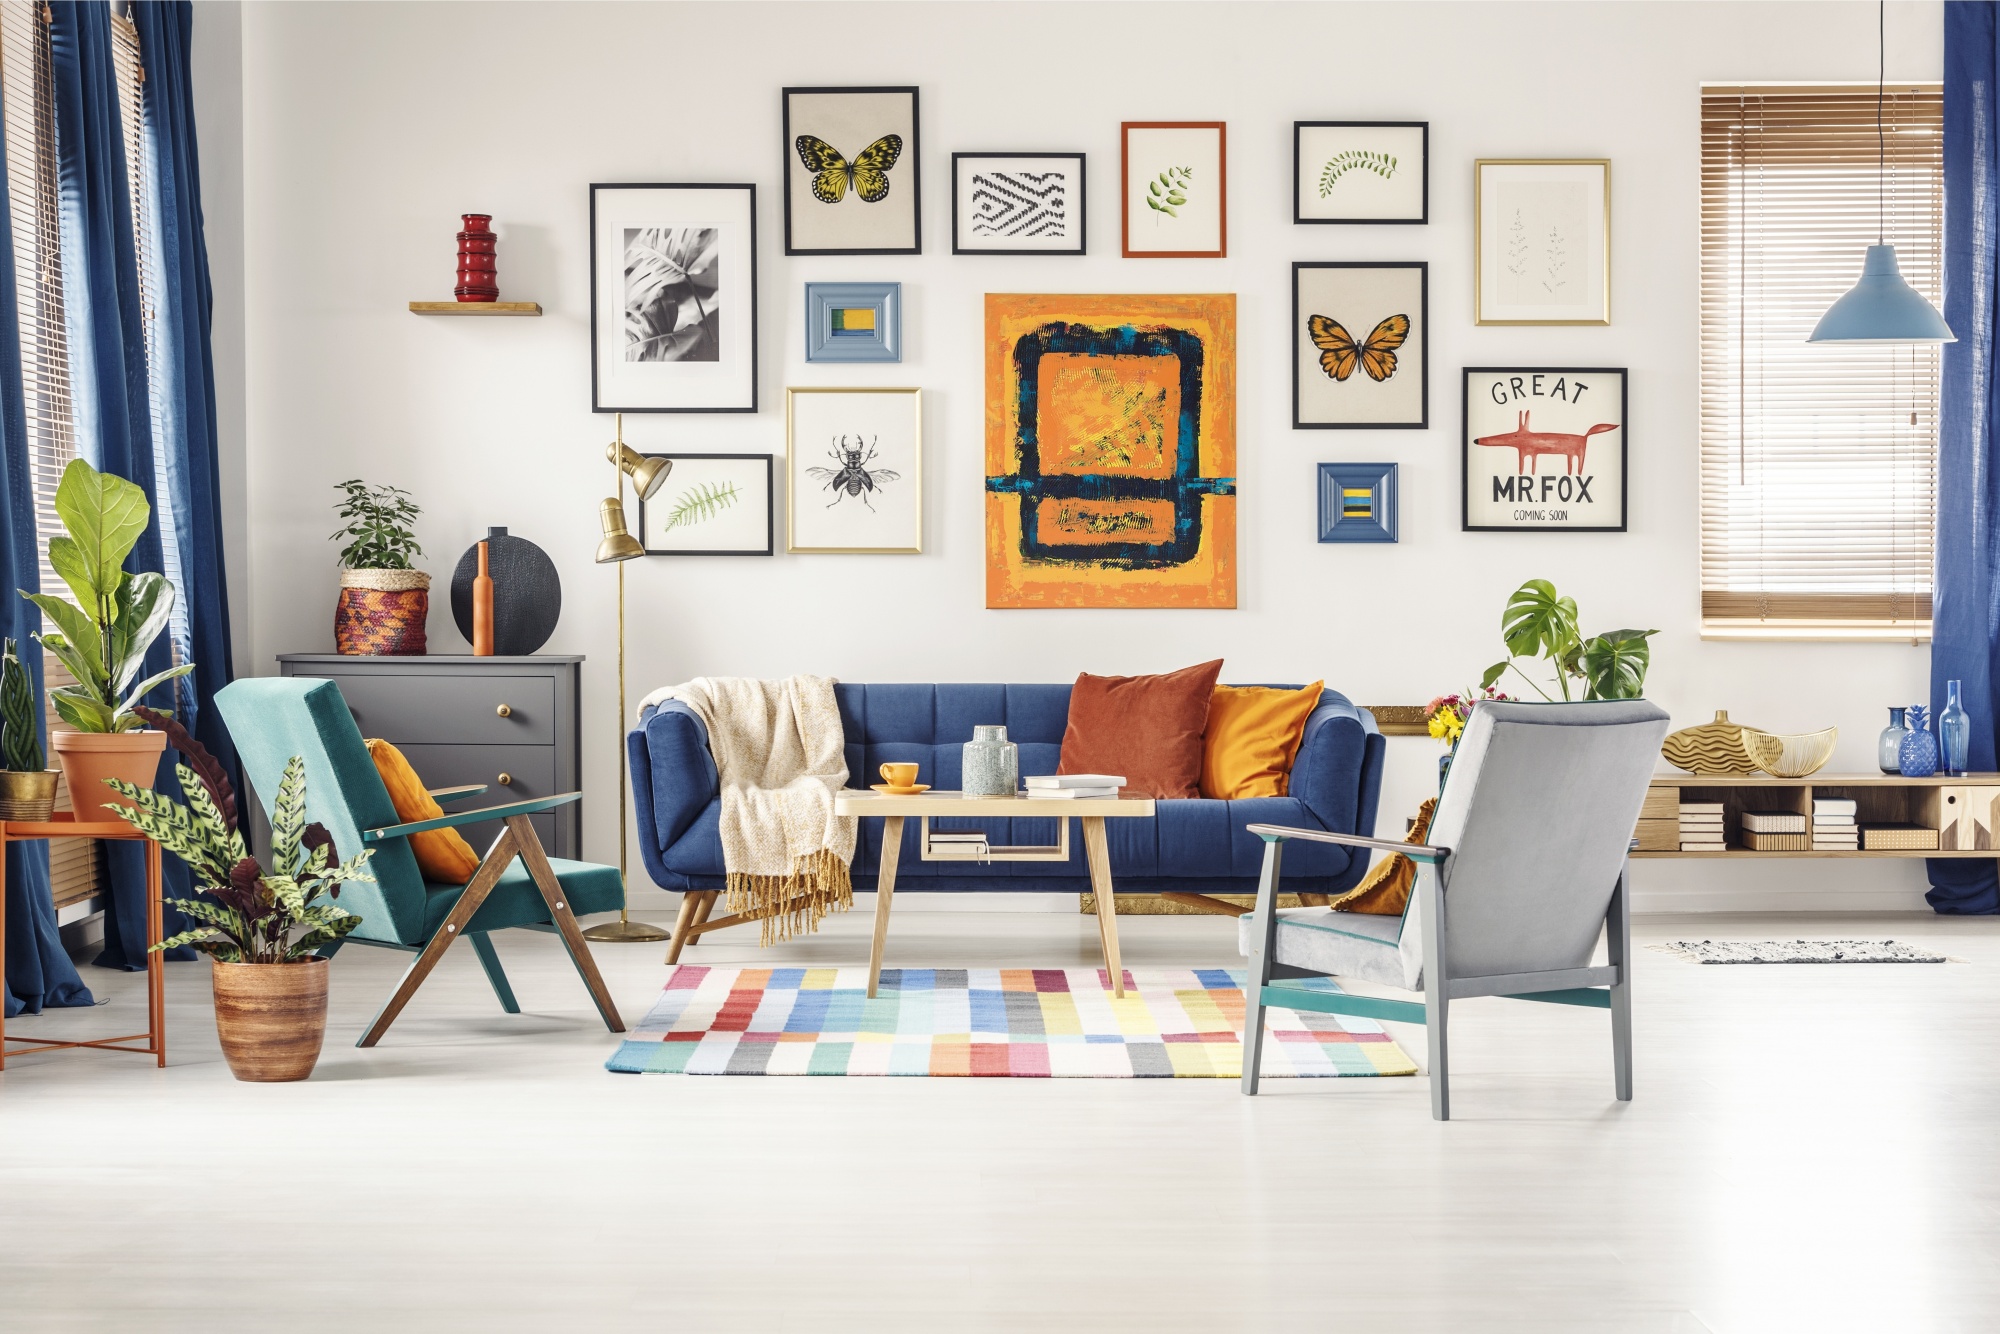 5 Easy Steps To The Perfect and Unique Gallery Wall above a blue couch with multiple artistic images and butterflies framed against an all white wall